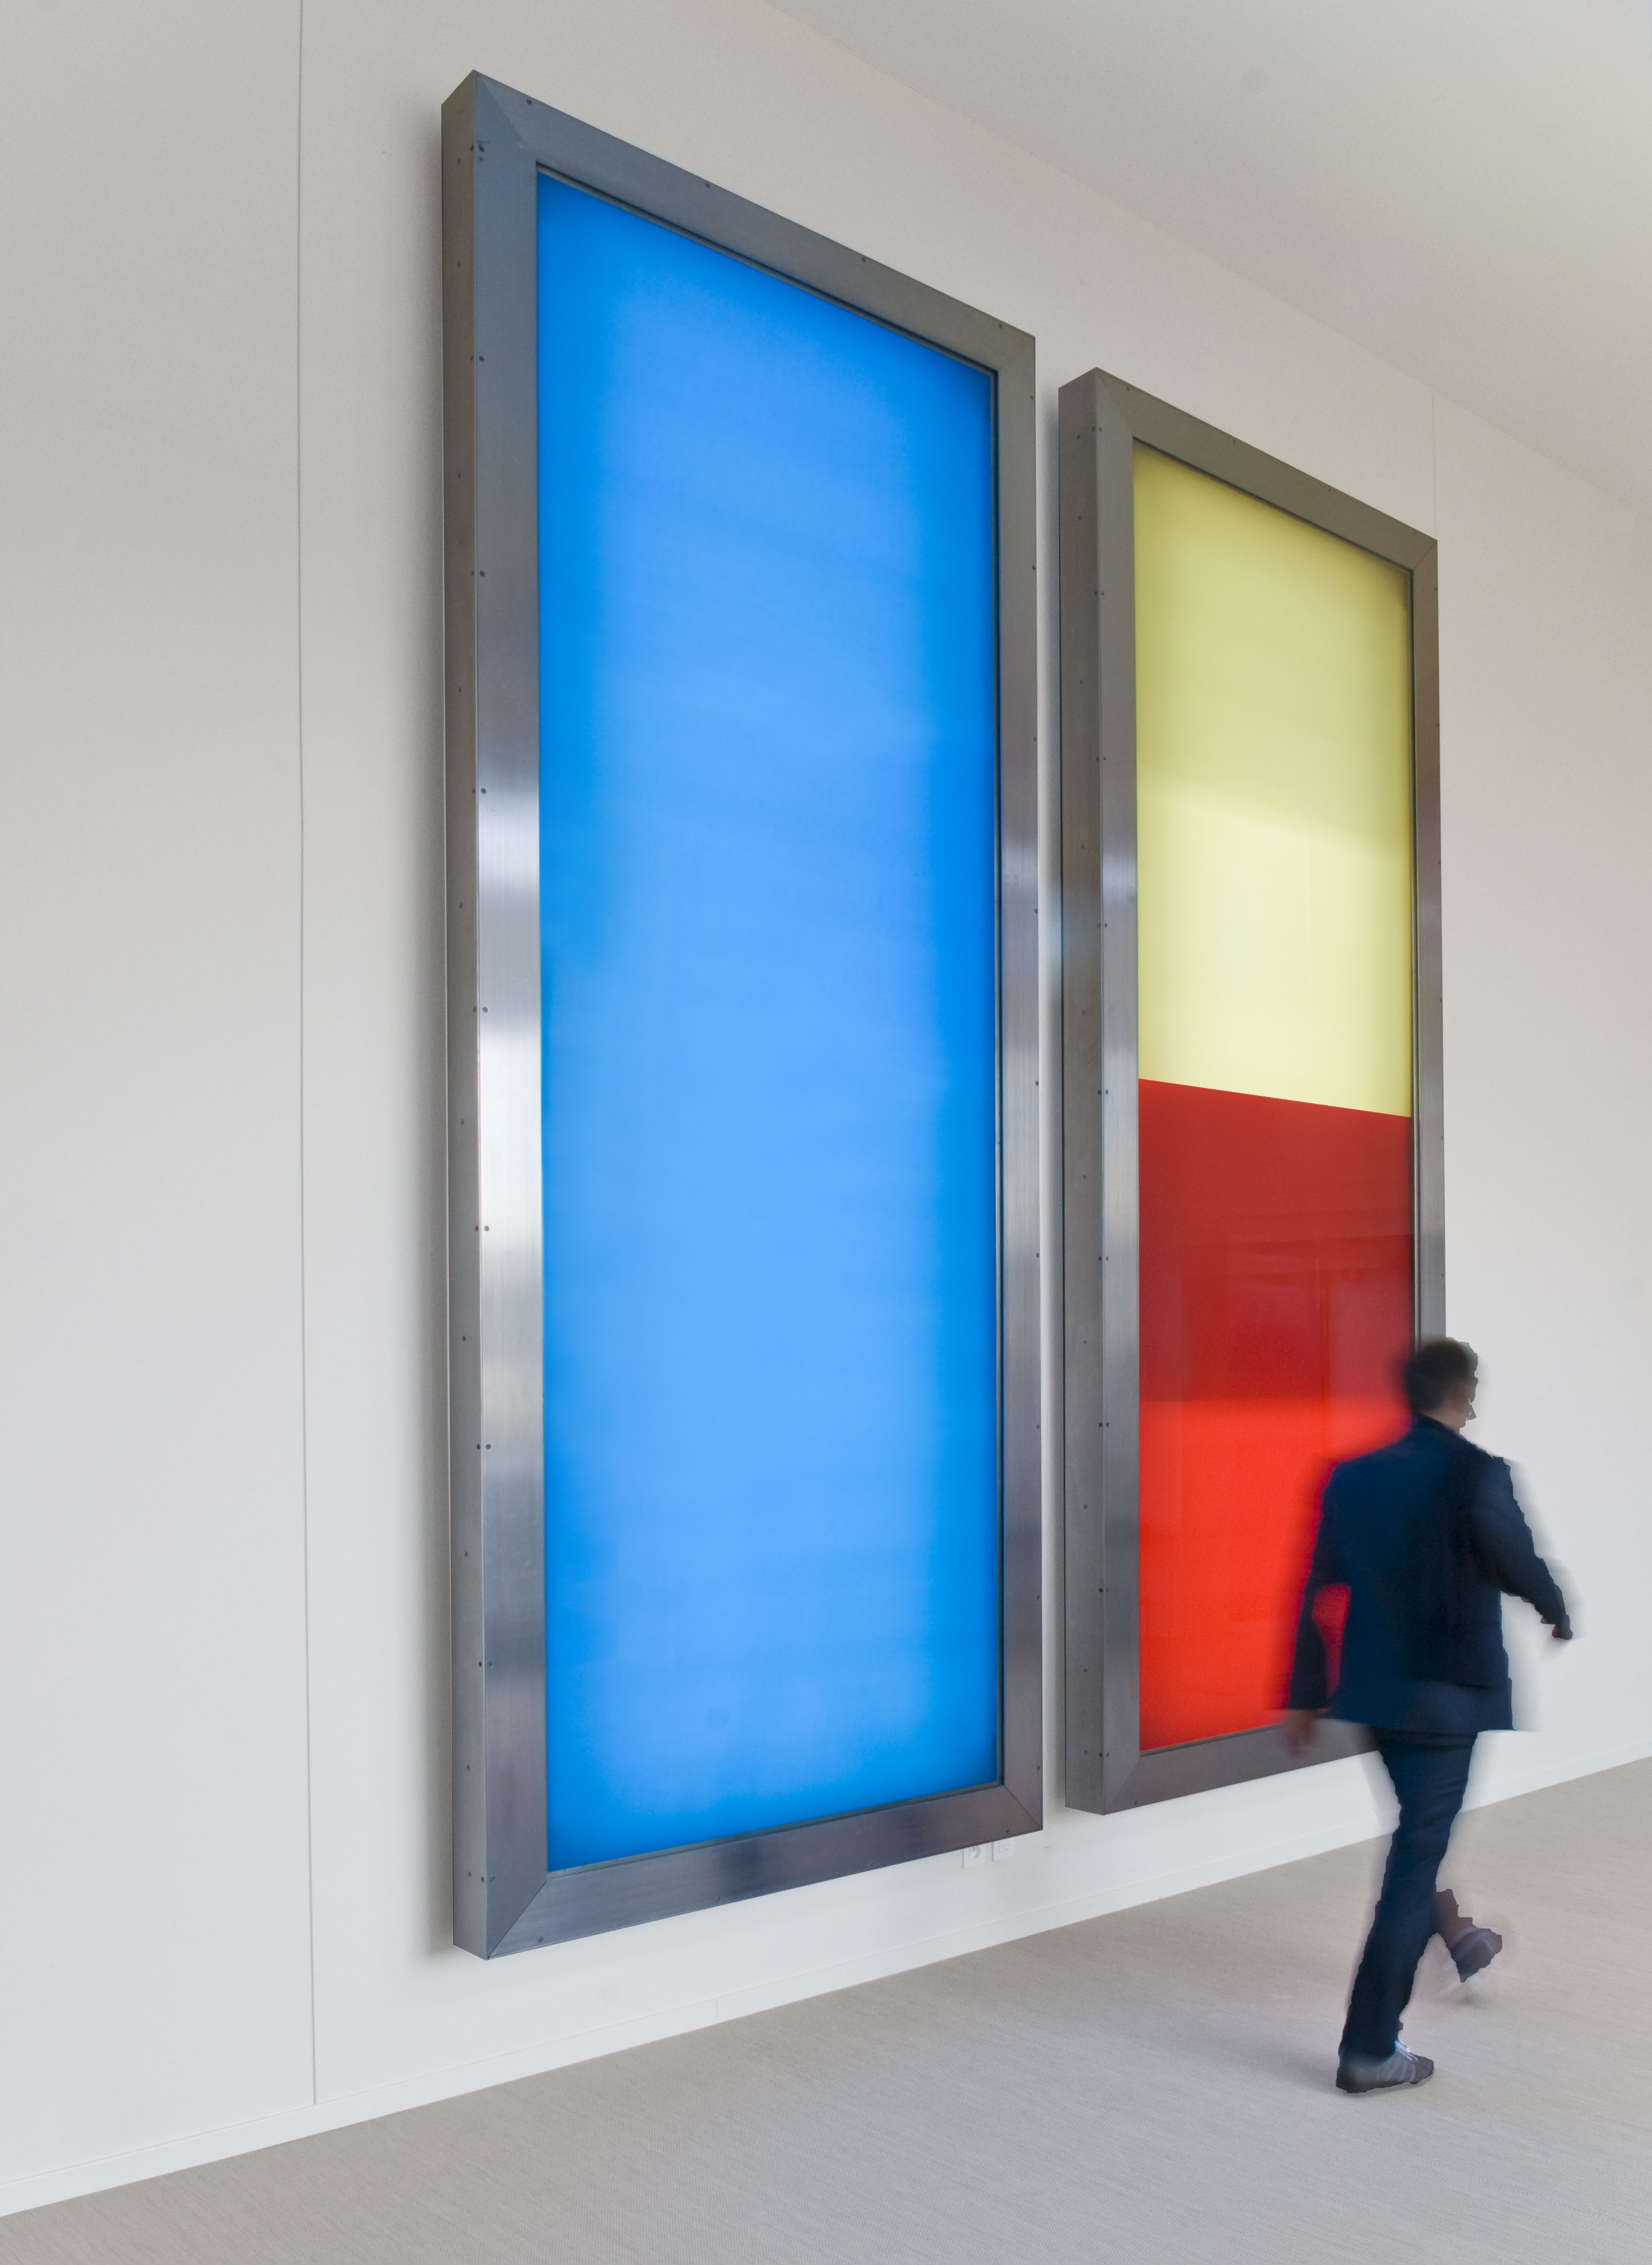 realities:united, 2x5: Two 14 x 5 foot light boxes will wash the entrance of the Granoff Center in a range of colors, from white, to rose, blue, mustard, and red.